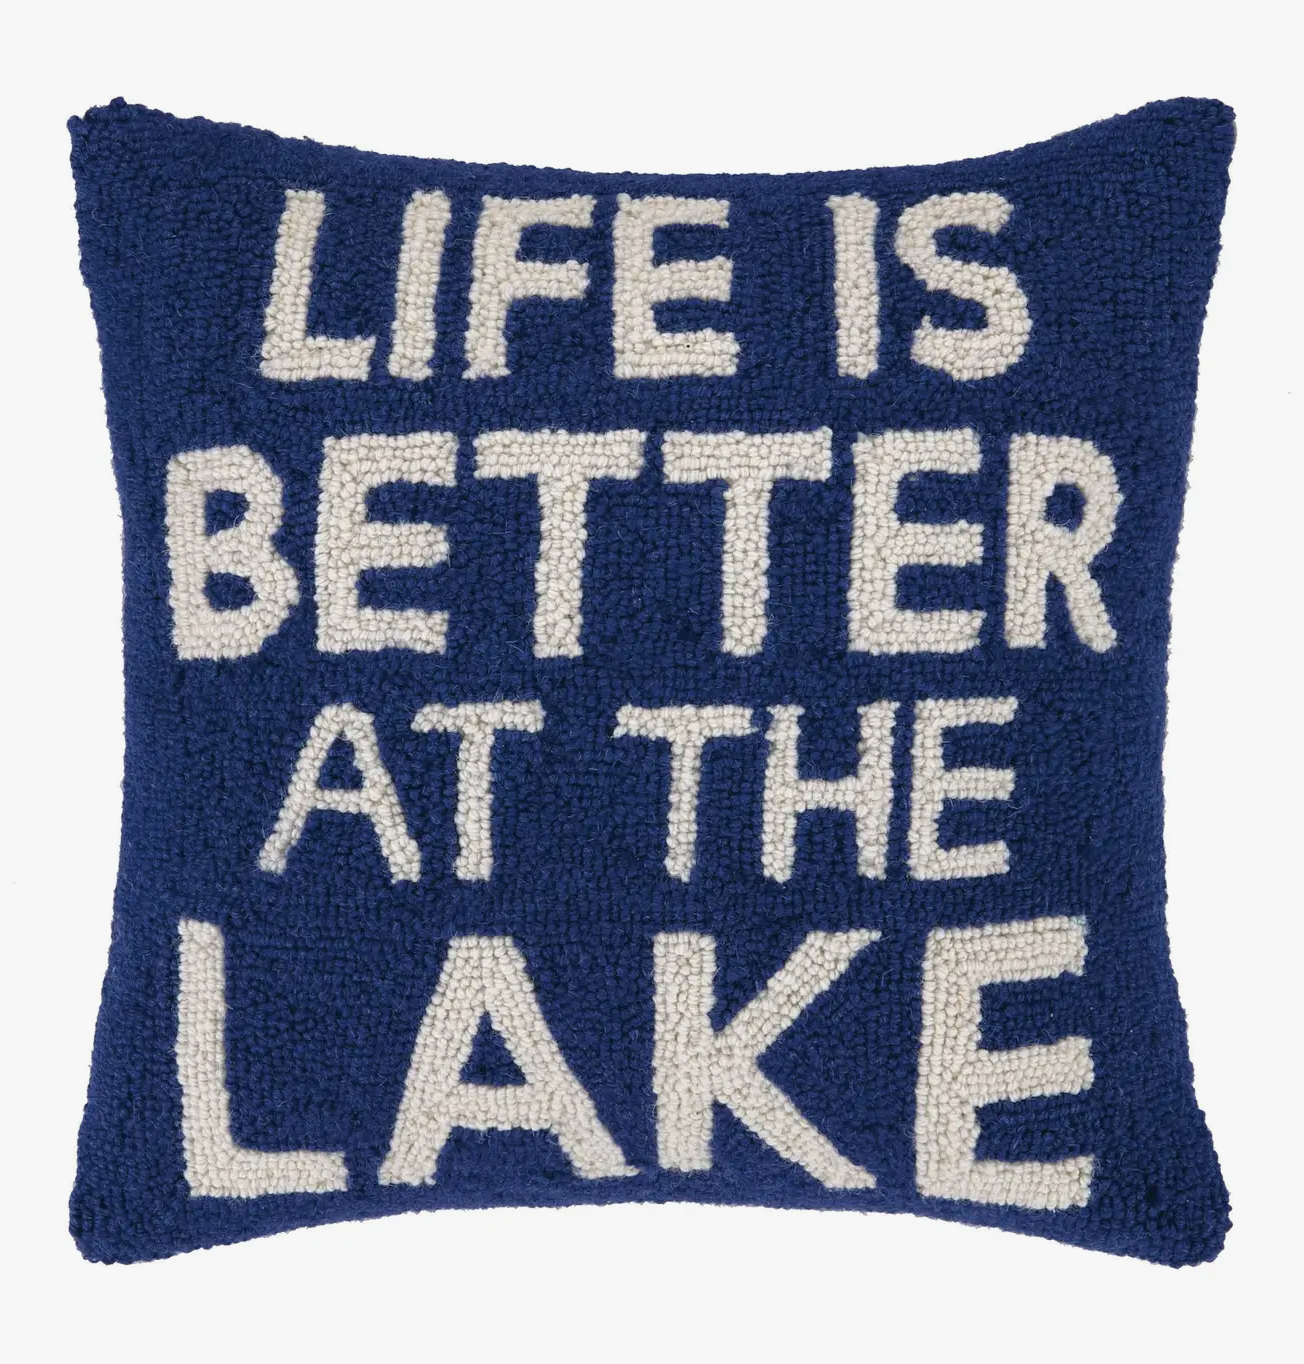 Life Is Better Lake Pillow